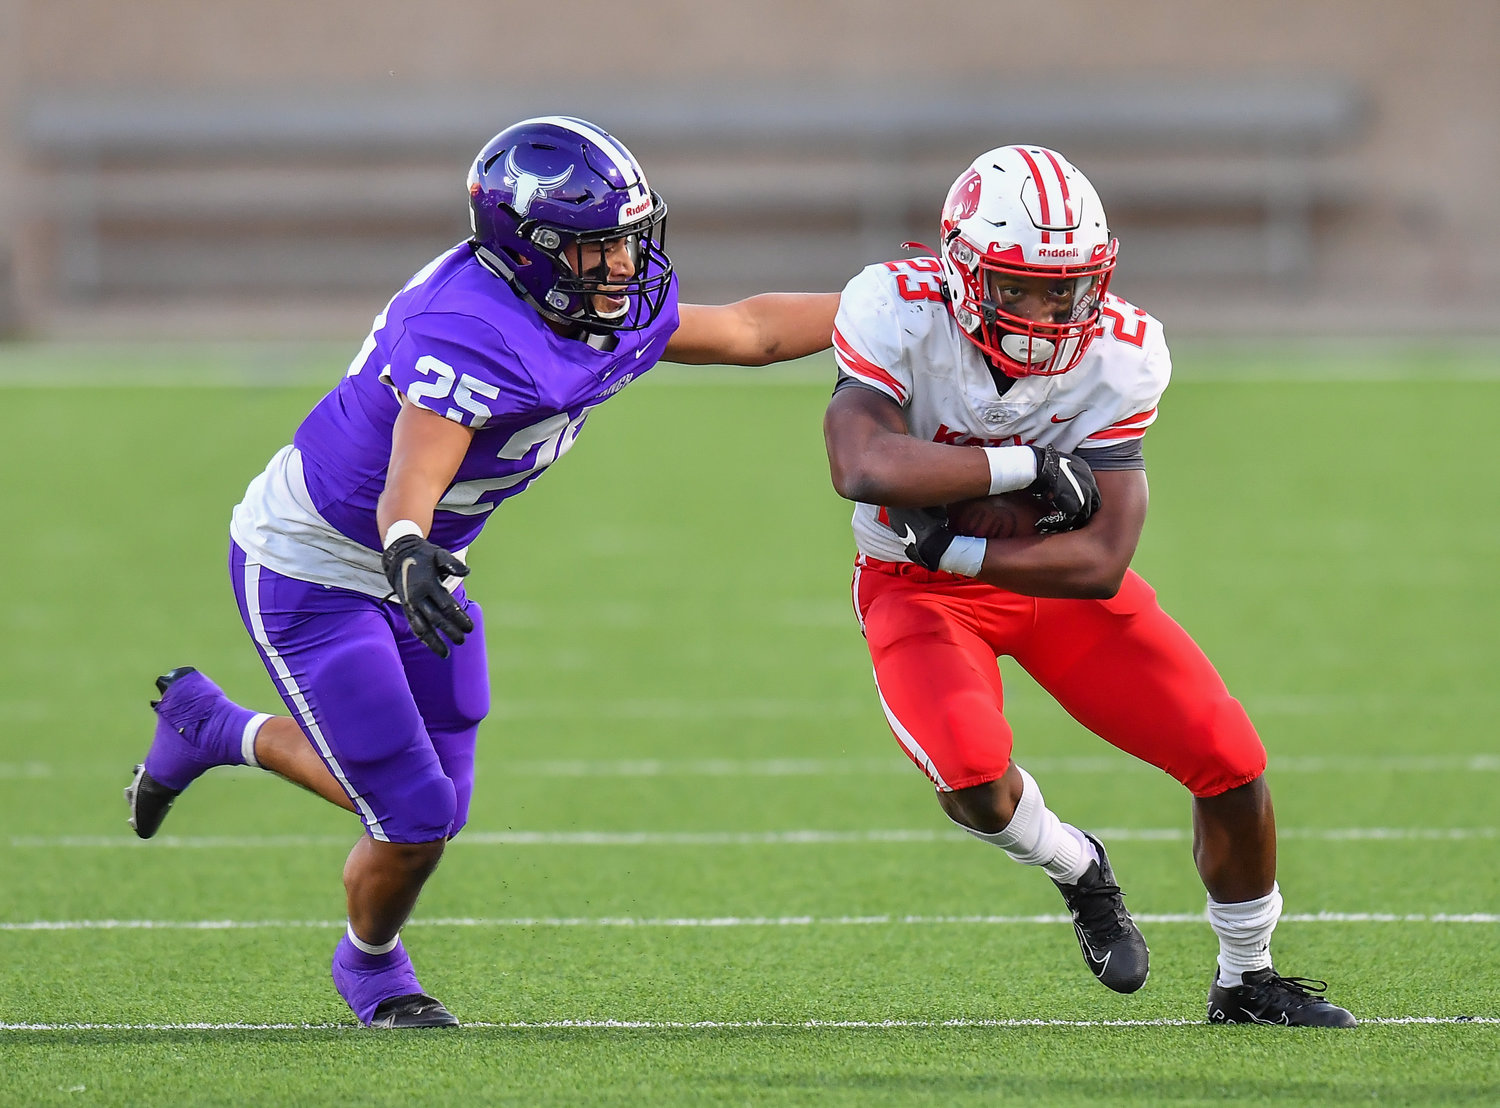 Katy, Tx. Nov 5, 2021: Katy's Seth Davis #23  carries the ball during a conference game between Katy and Morton Ranch at Legacy Stadium in Katy. (Photo by Mark Goodman / Katy Times)